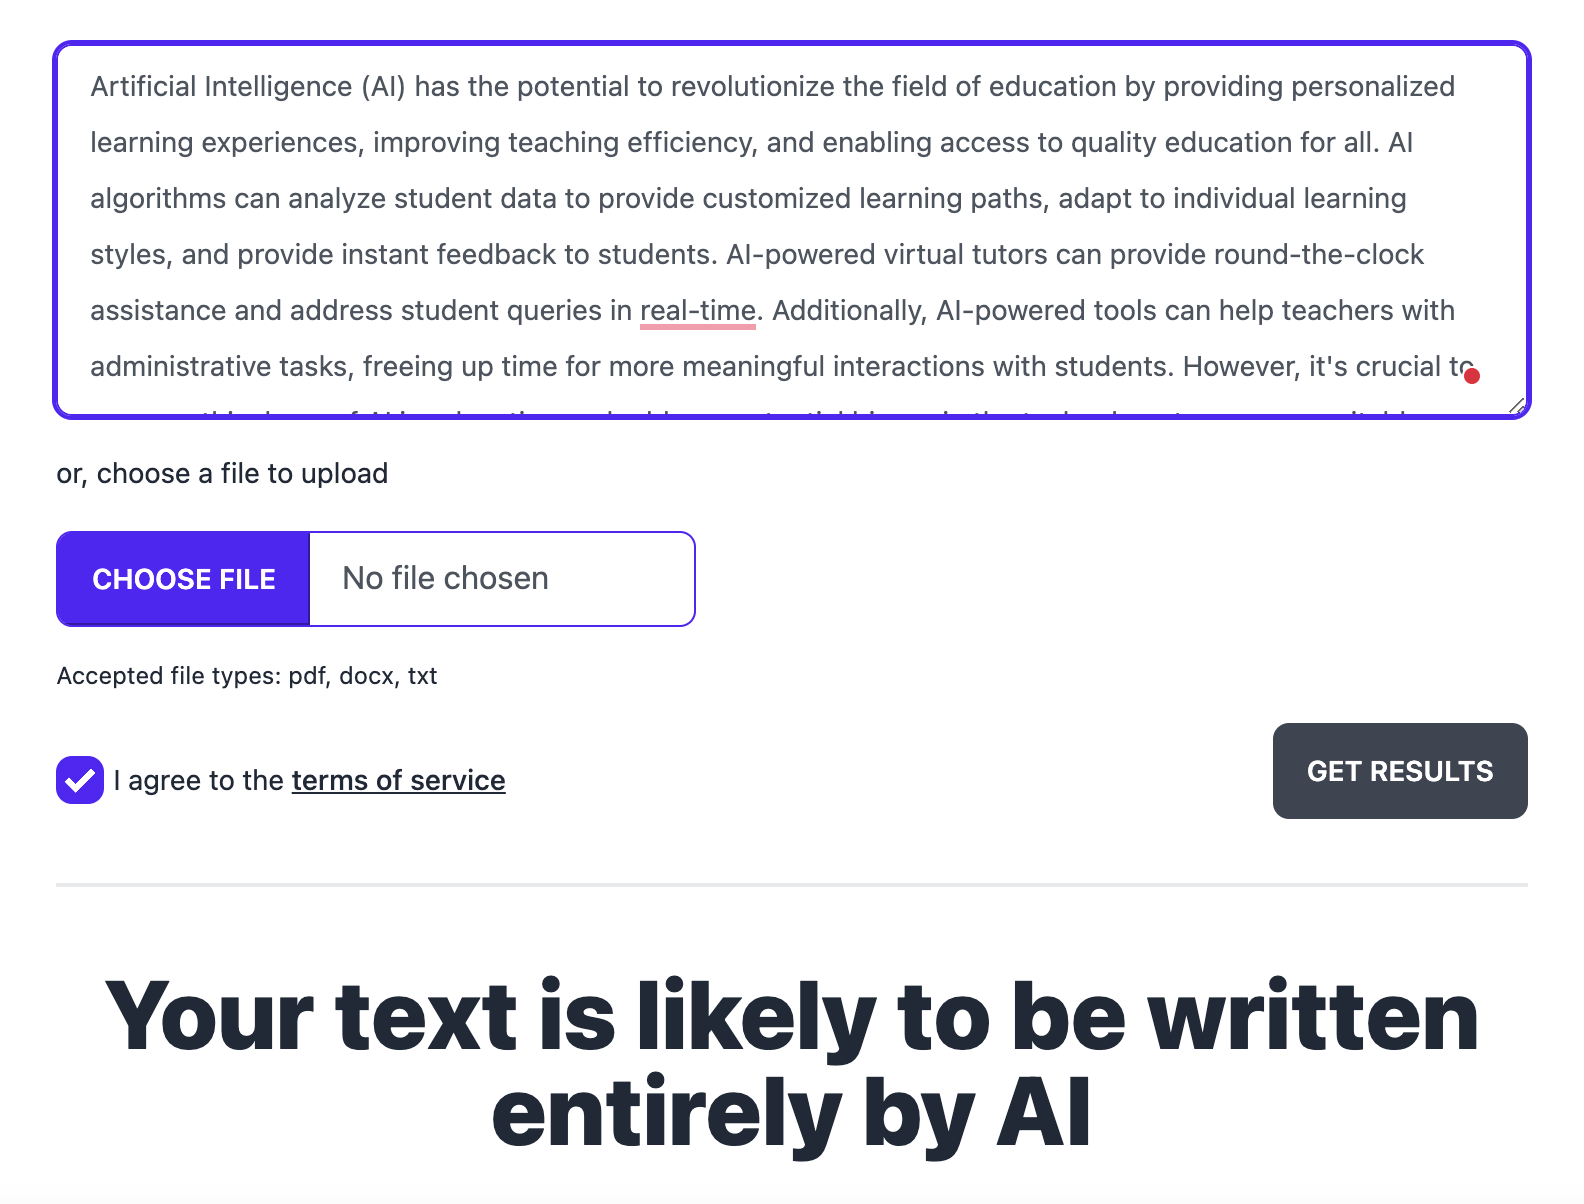 text likely to be written entirely by AI